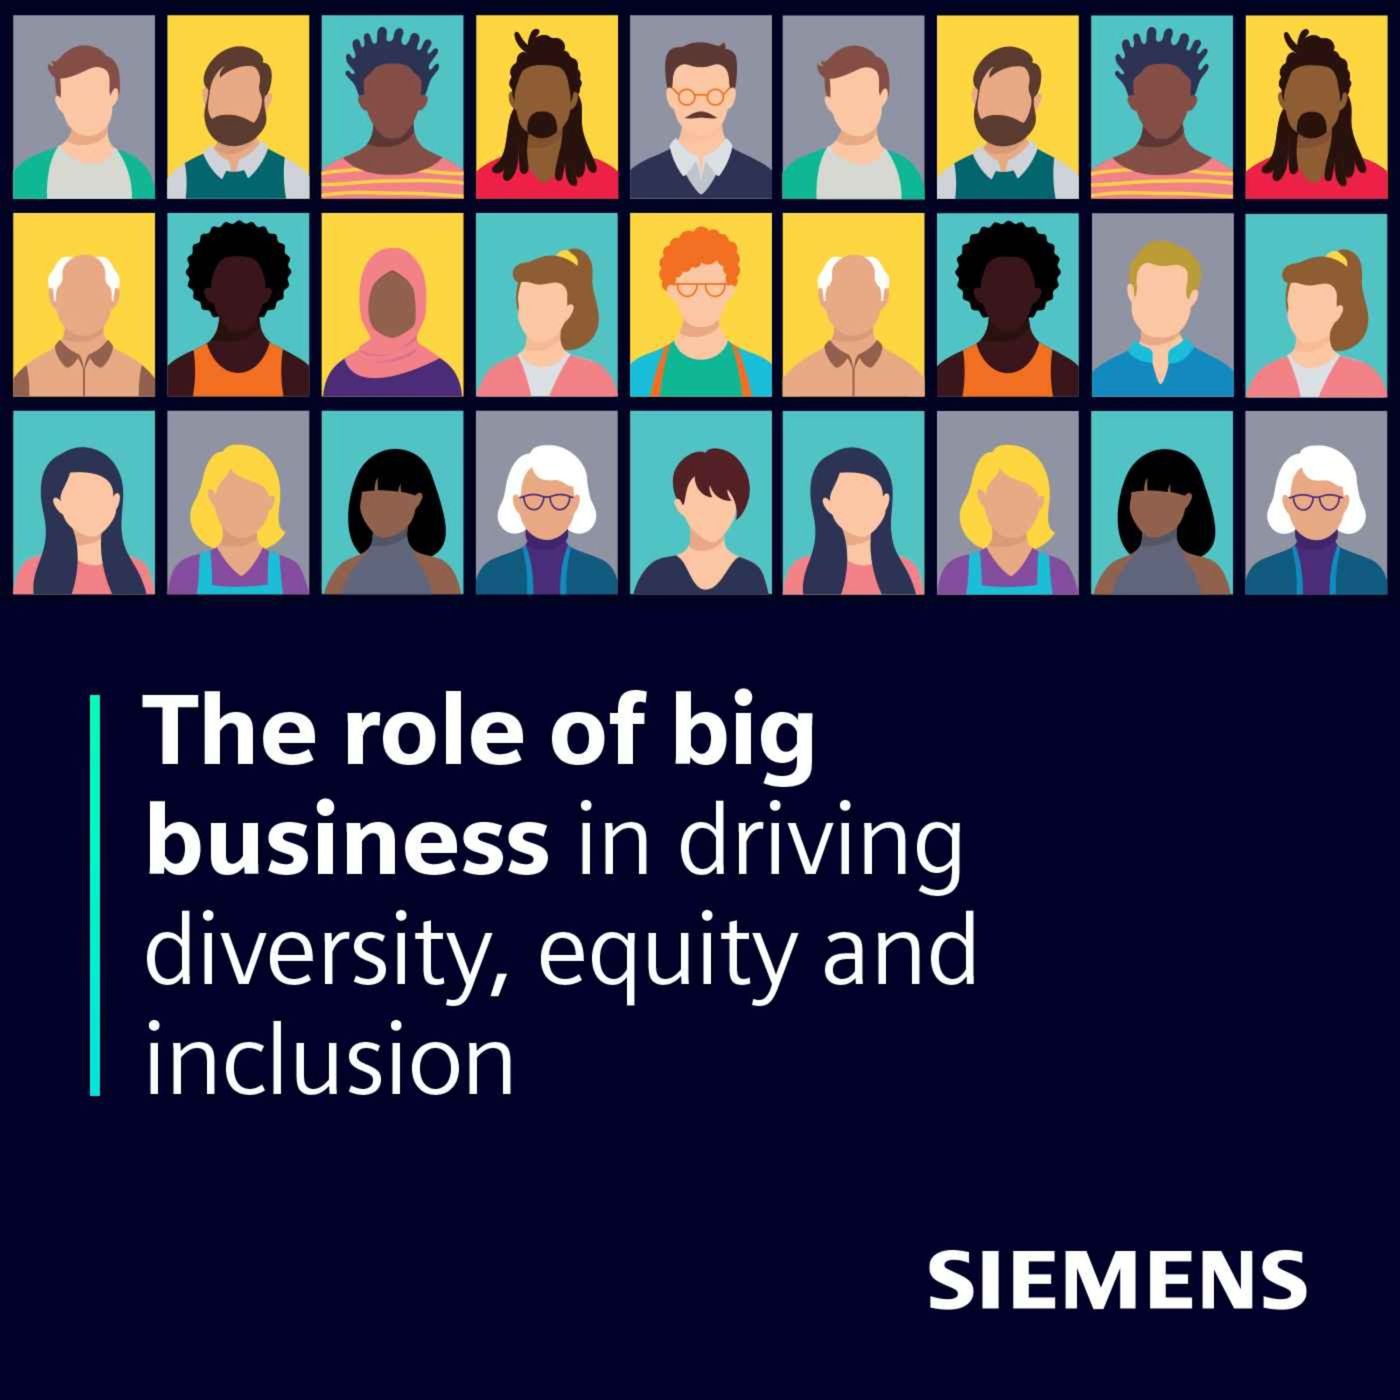 The role of big business in driving diversity, equity and inclusion.